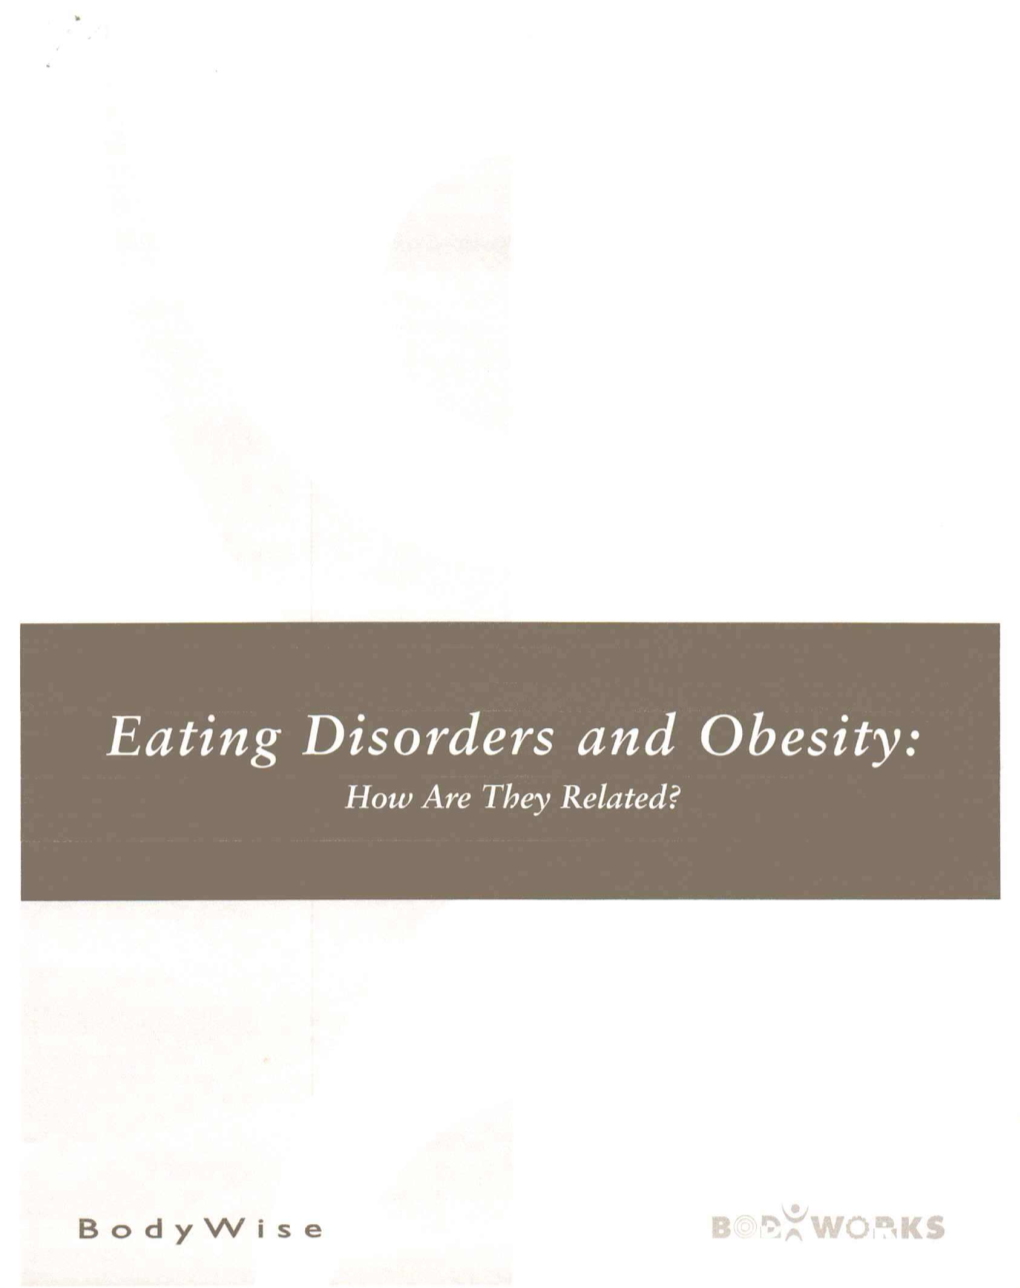 How Are Eating Disorder and Obesity Related?